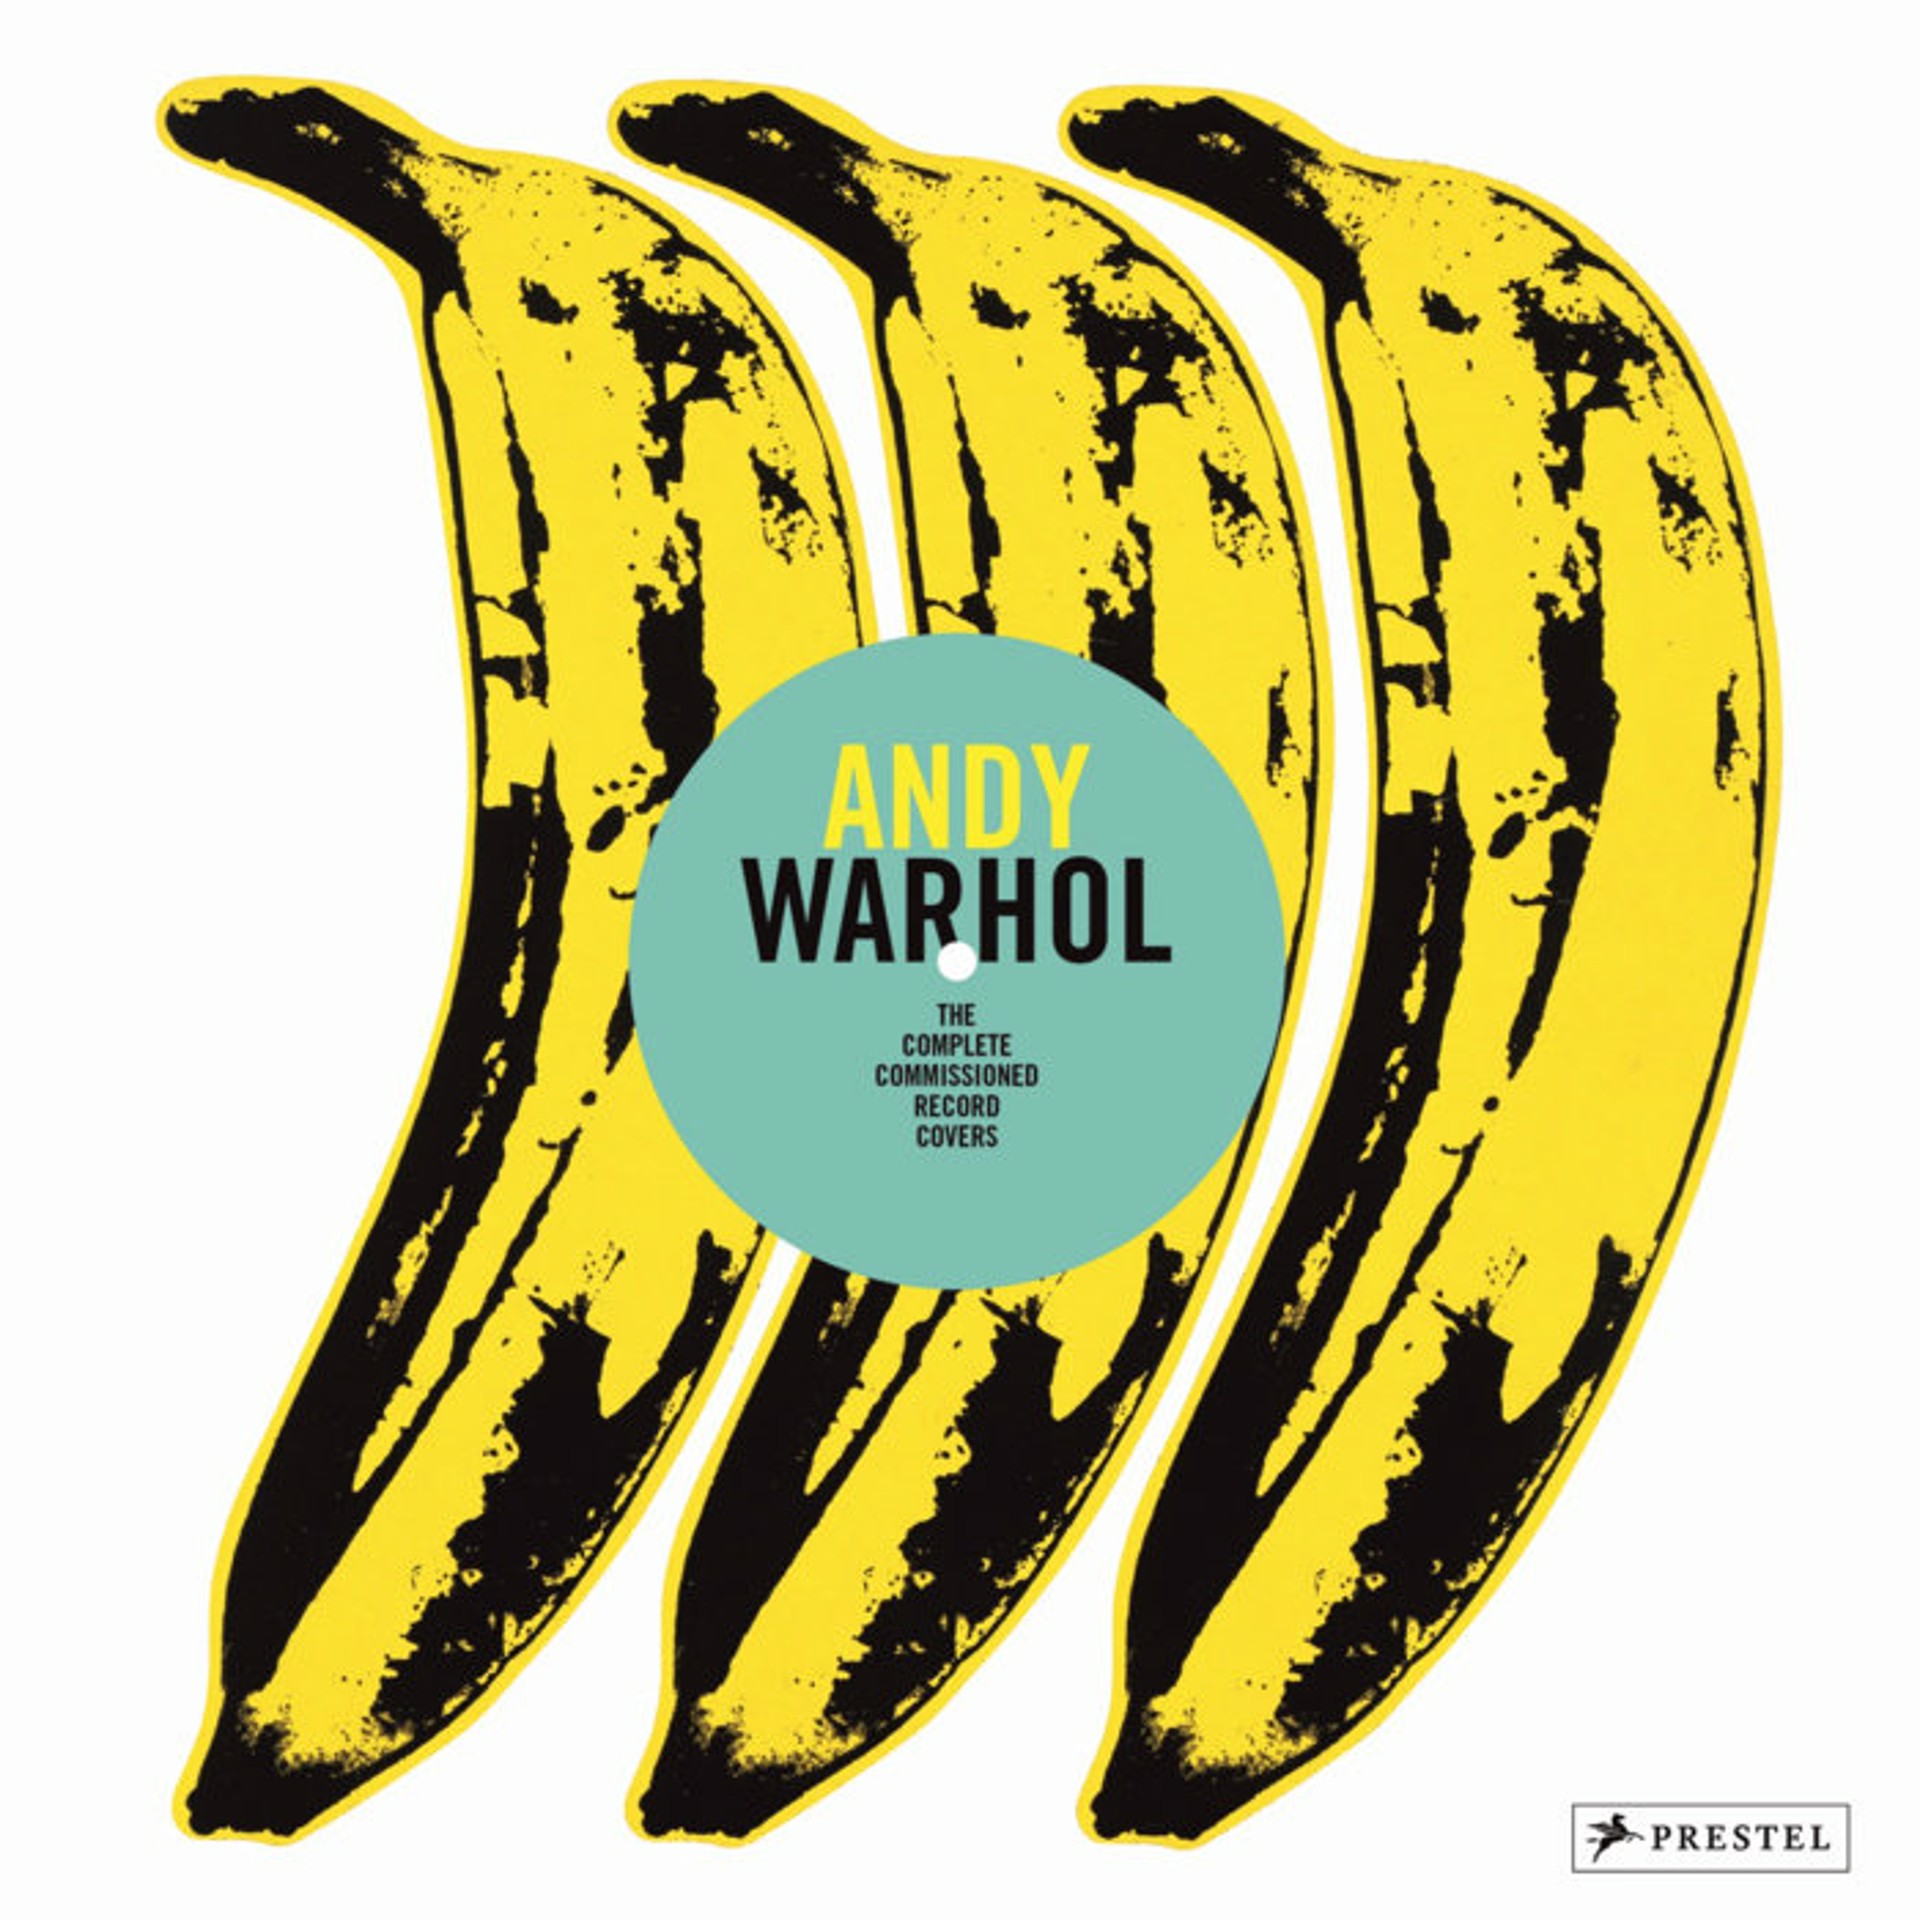 Andy Warhol: The Complete Commissioned Record Covers by Andy Warhol